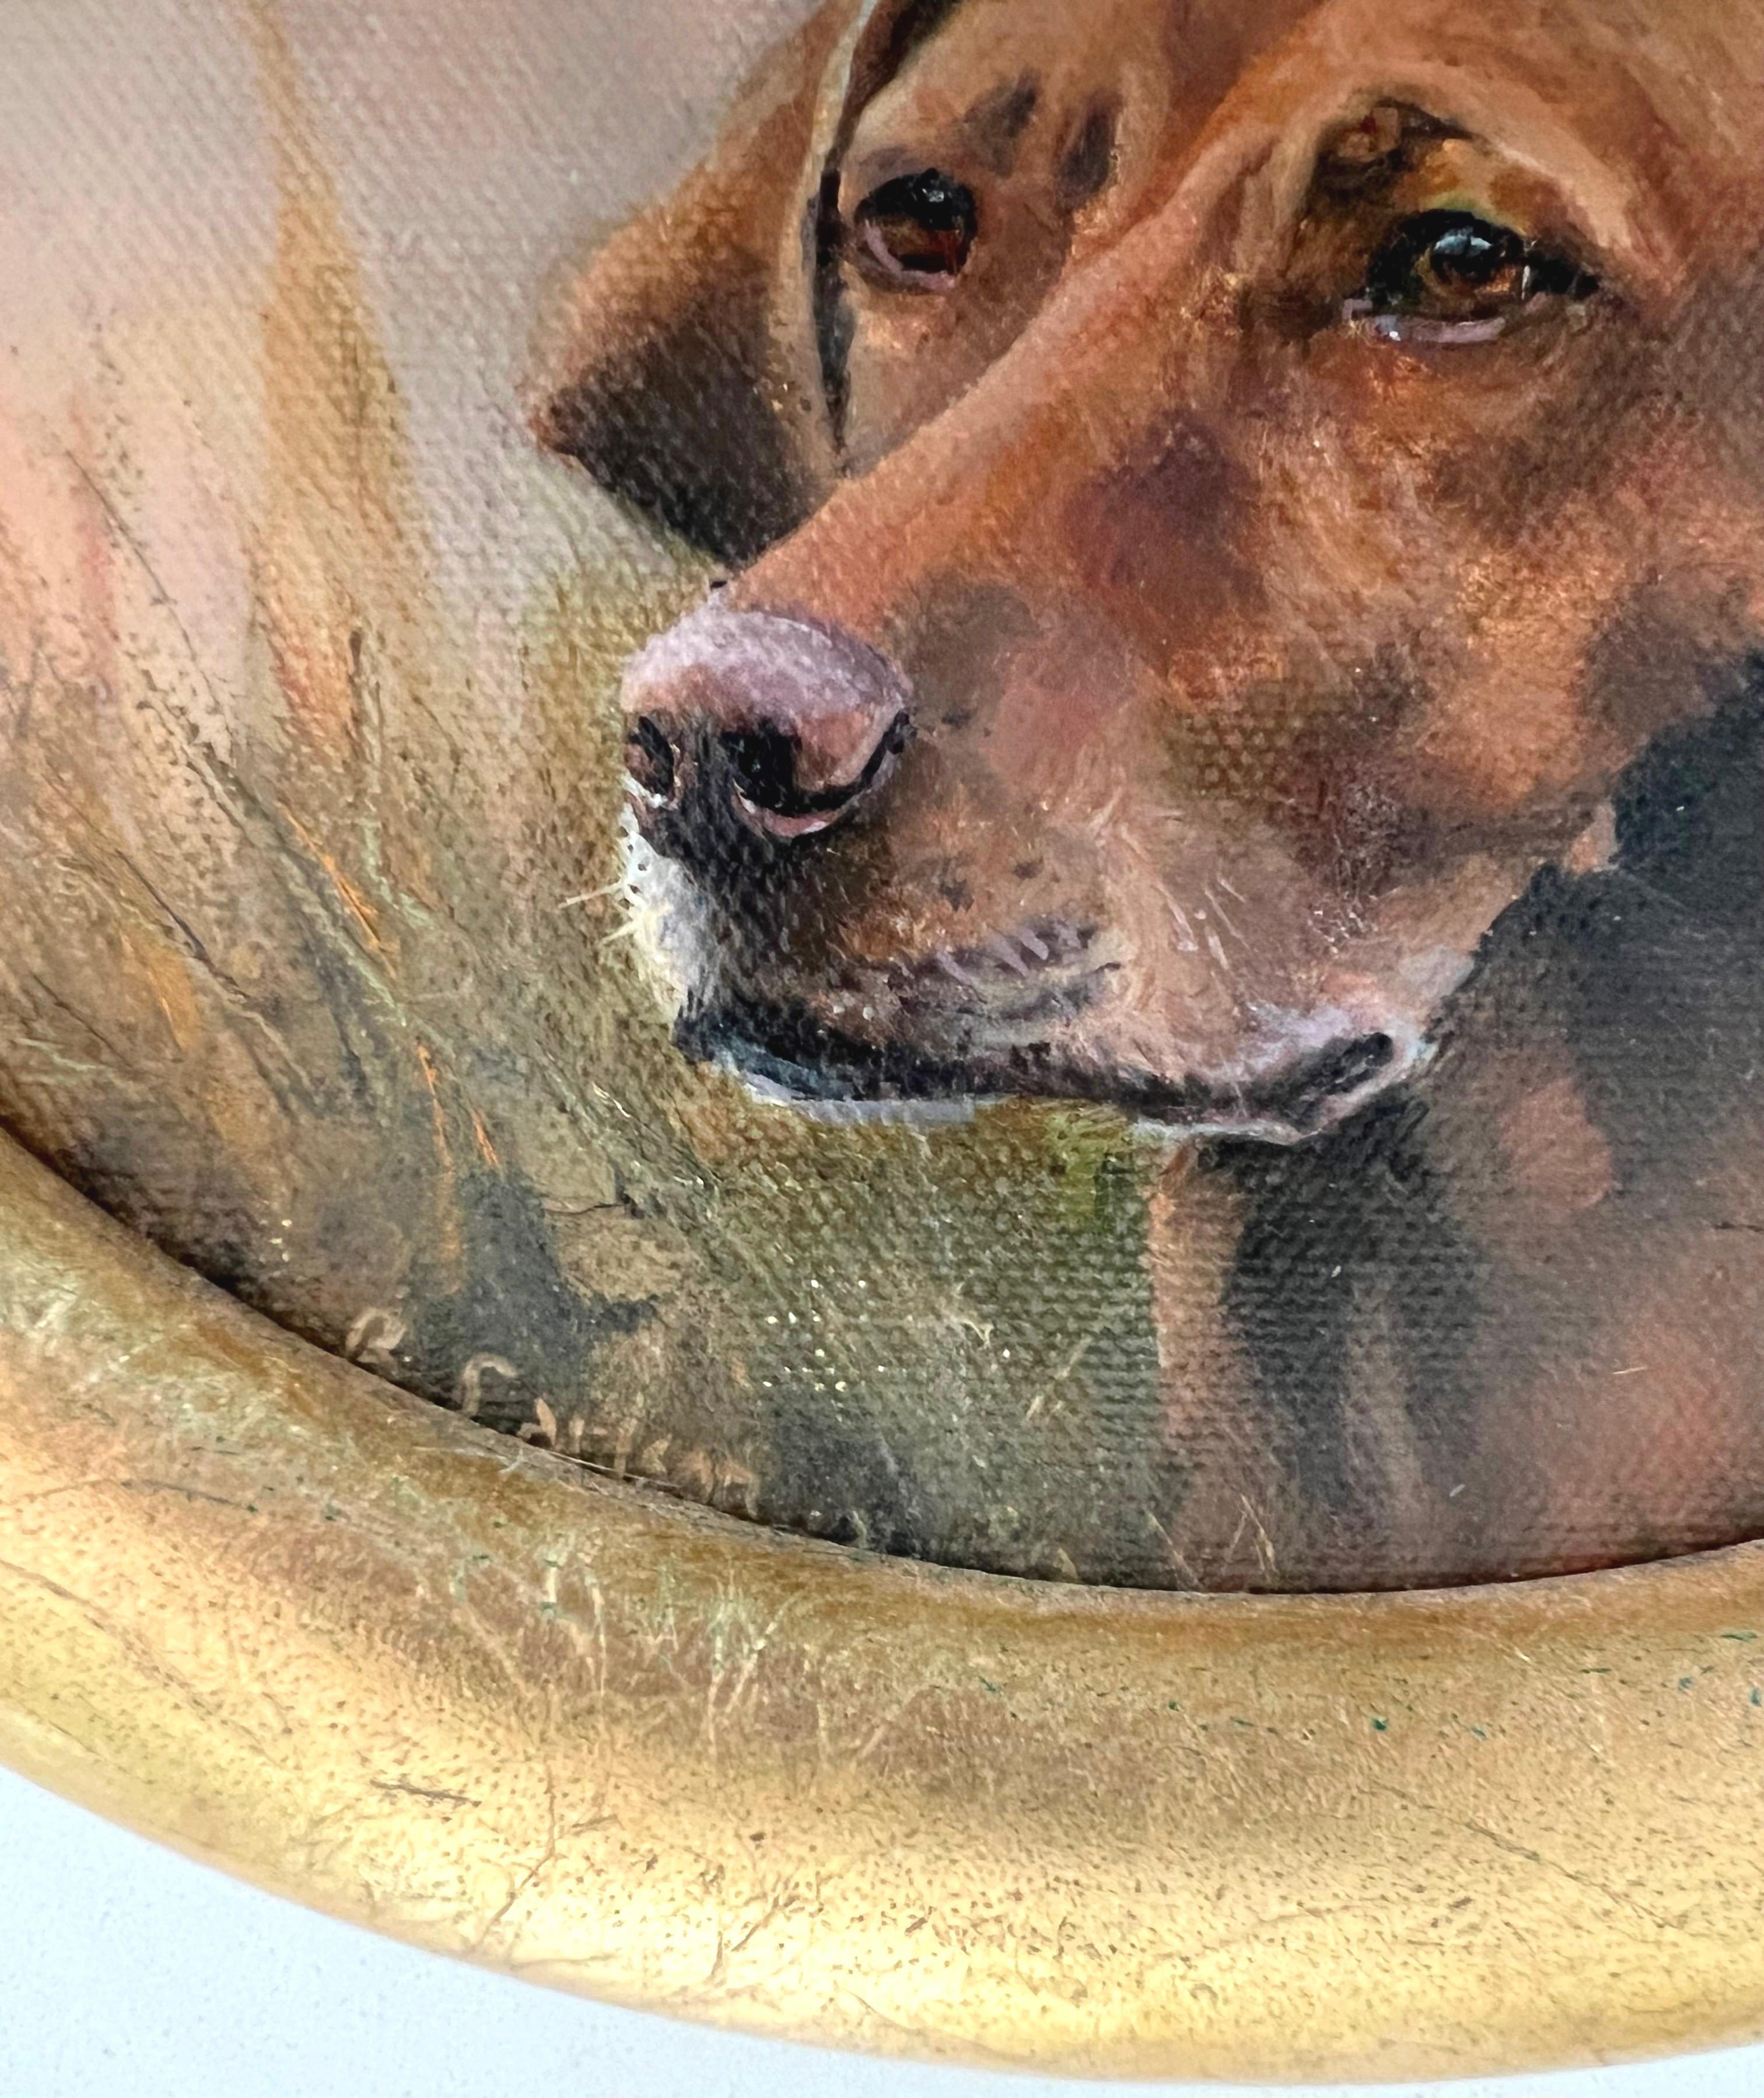 Beth Carlson's oval dog painting featuring a closeup of an elegant Vizsla showcases the artist's talent in capturing the soul of her animal subjects in her dog paintings. The gentle and loving demeanor of the Vizsla radiates beauty both inwardly and